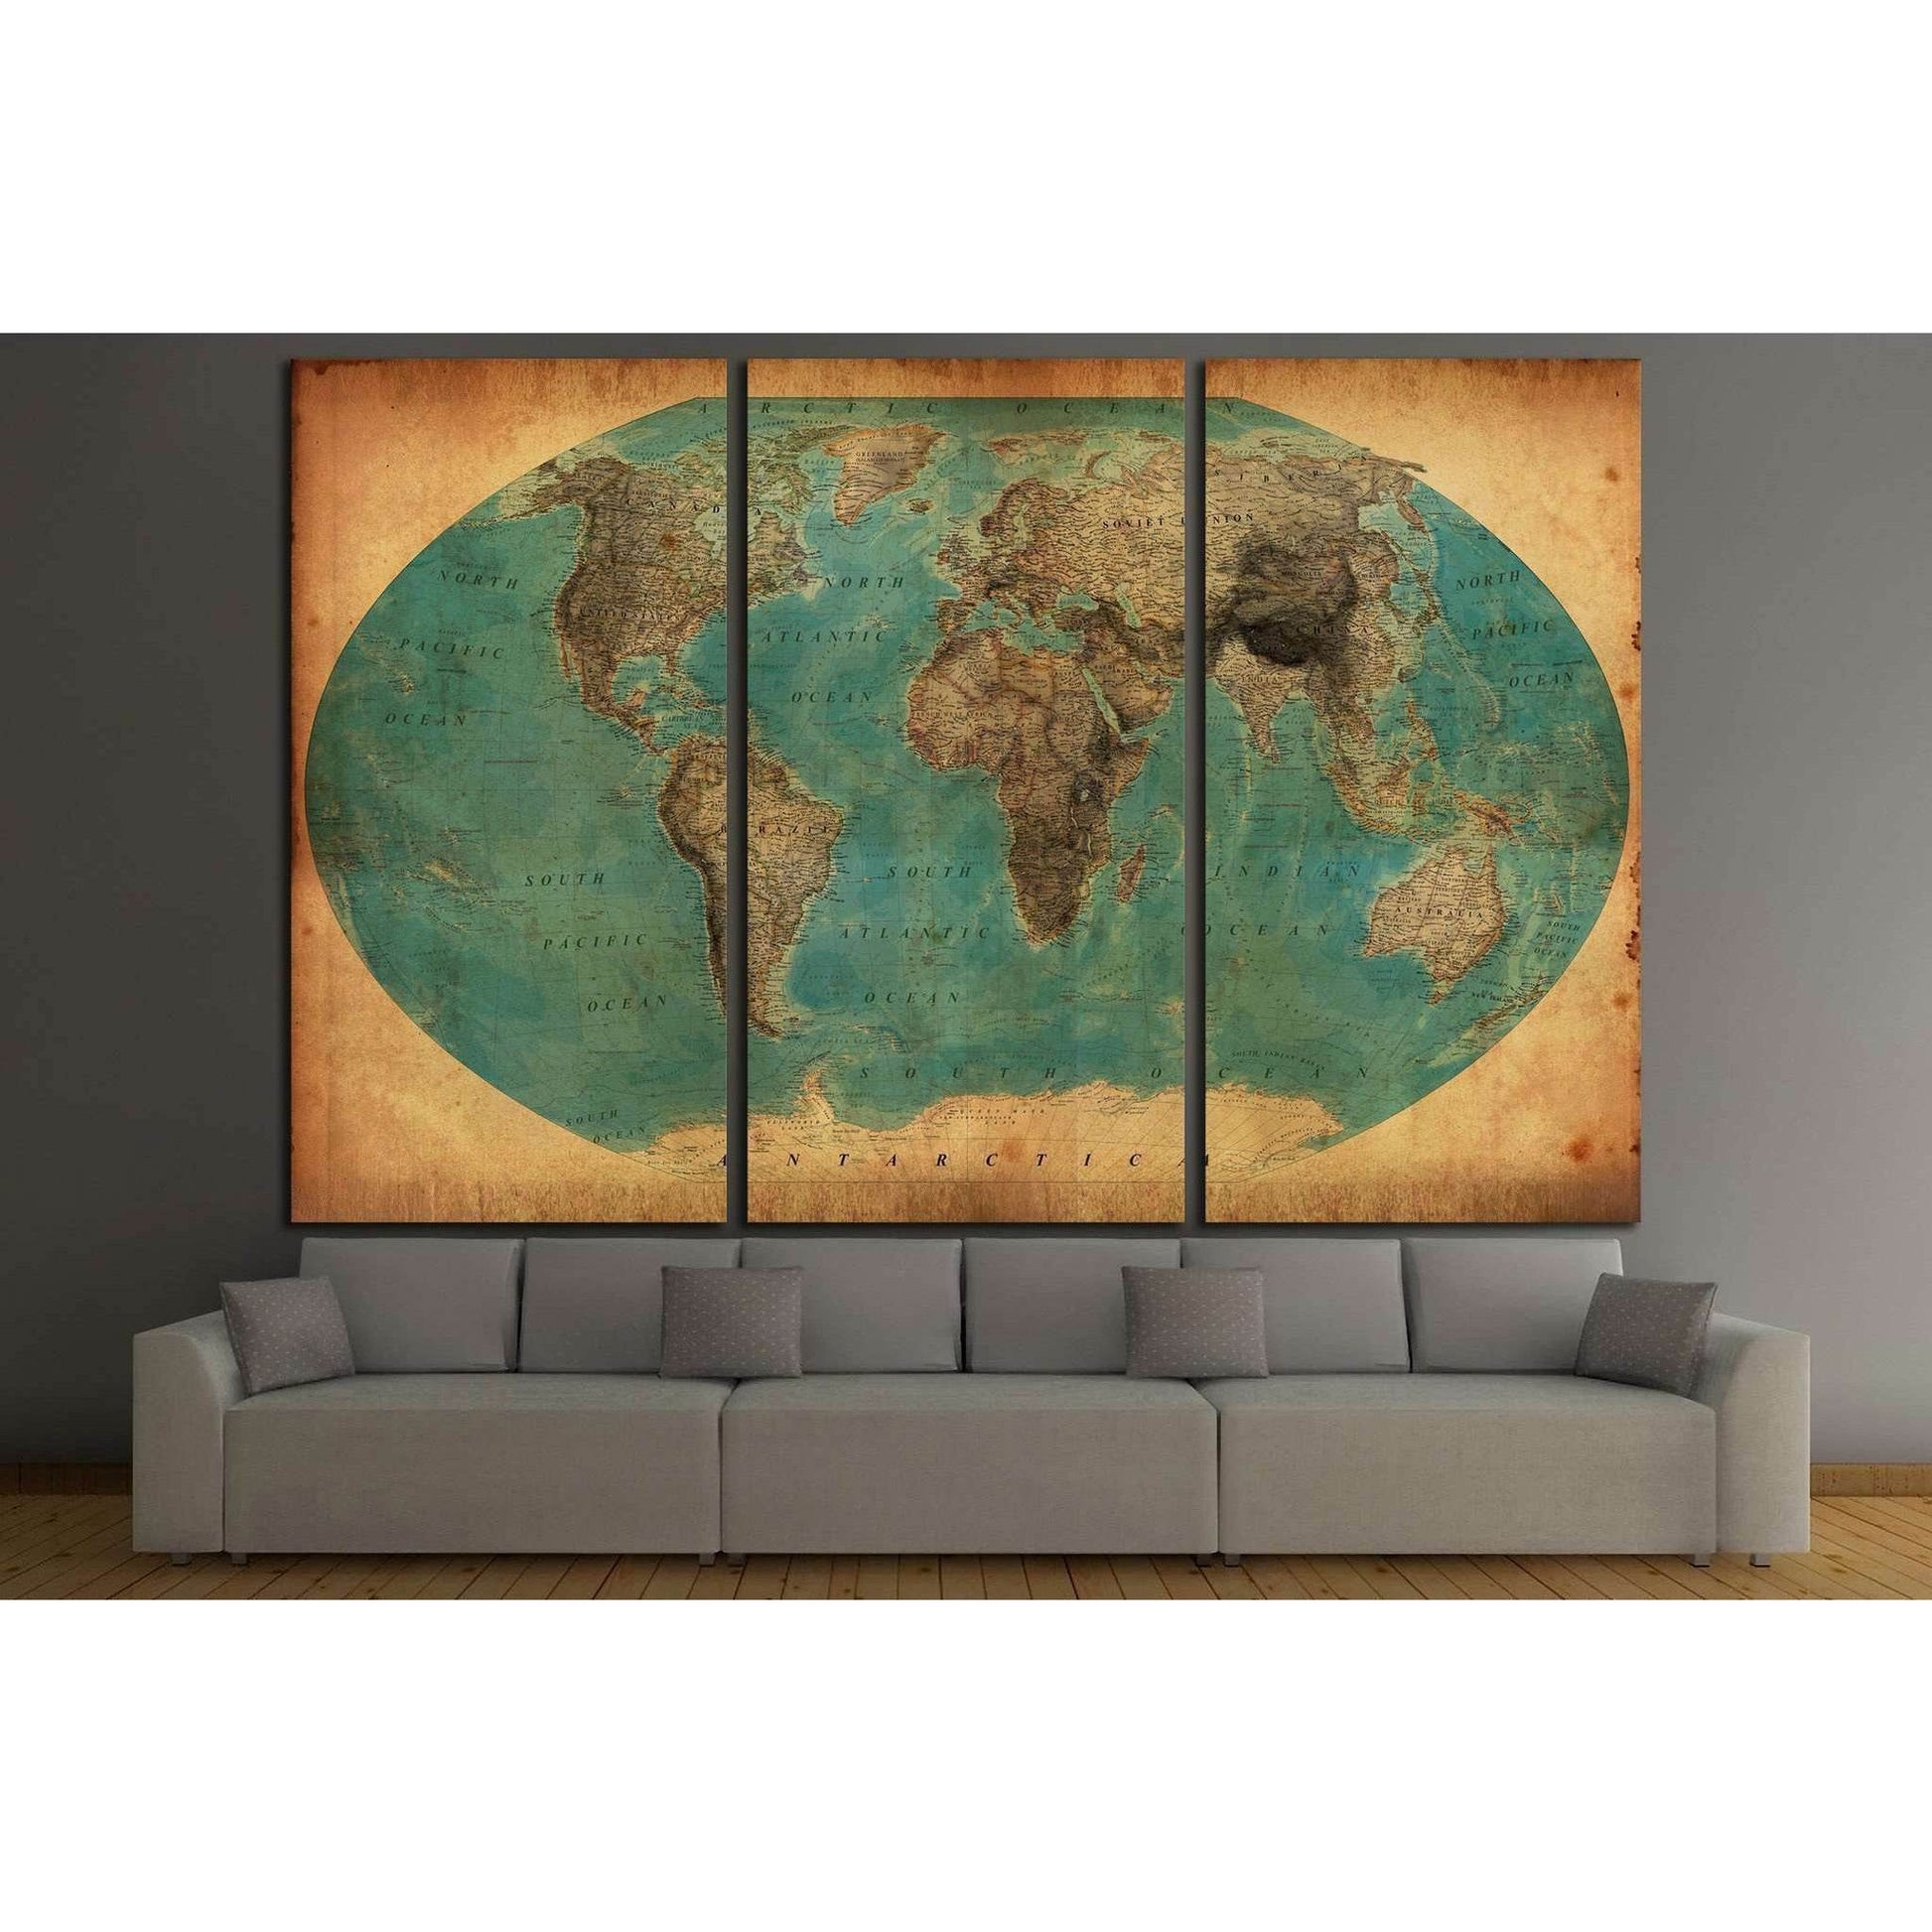 Old Vintage World Map Canvas PrintDecorate your walls with a vintage World Map Canvas Art Print from the world's largest art gallery. Choose from thousands of Vintage Map artworks with various sizing options. Choose your perfect art print to complete your